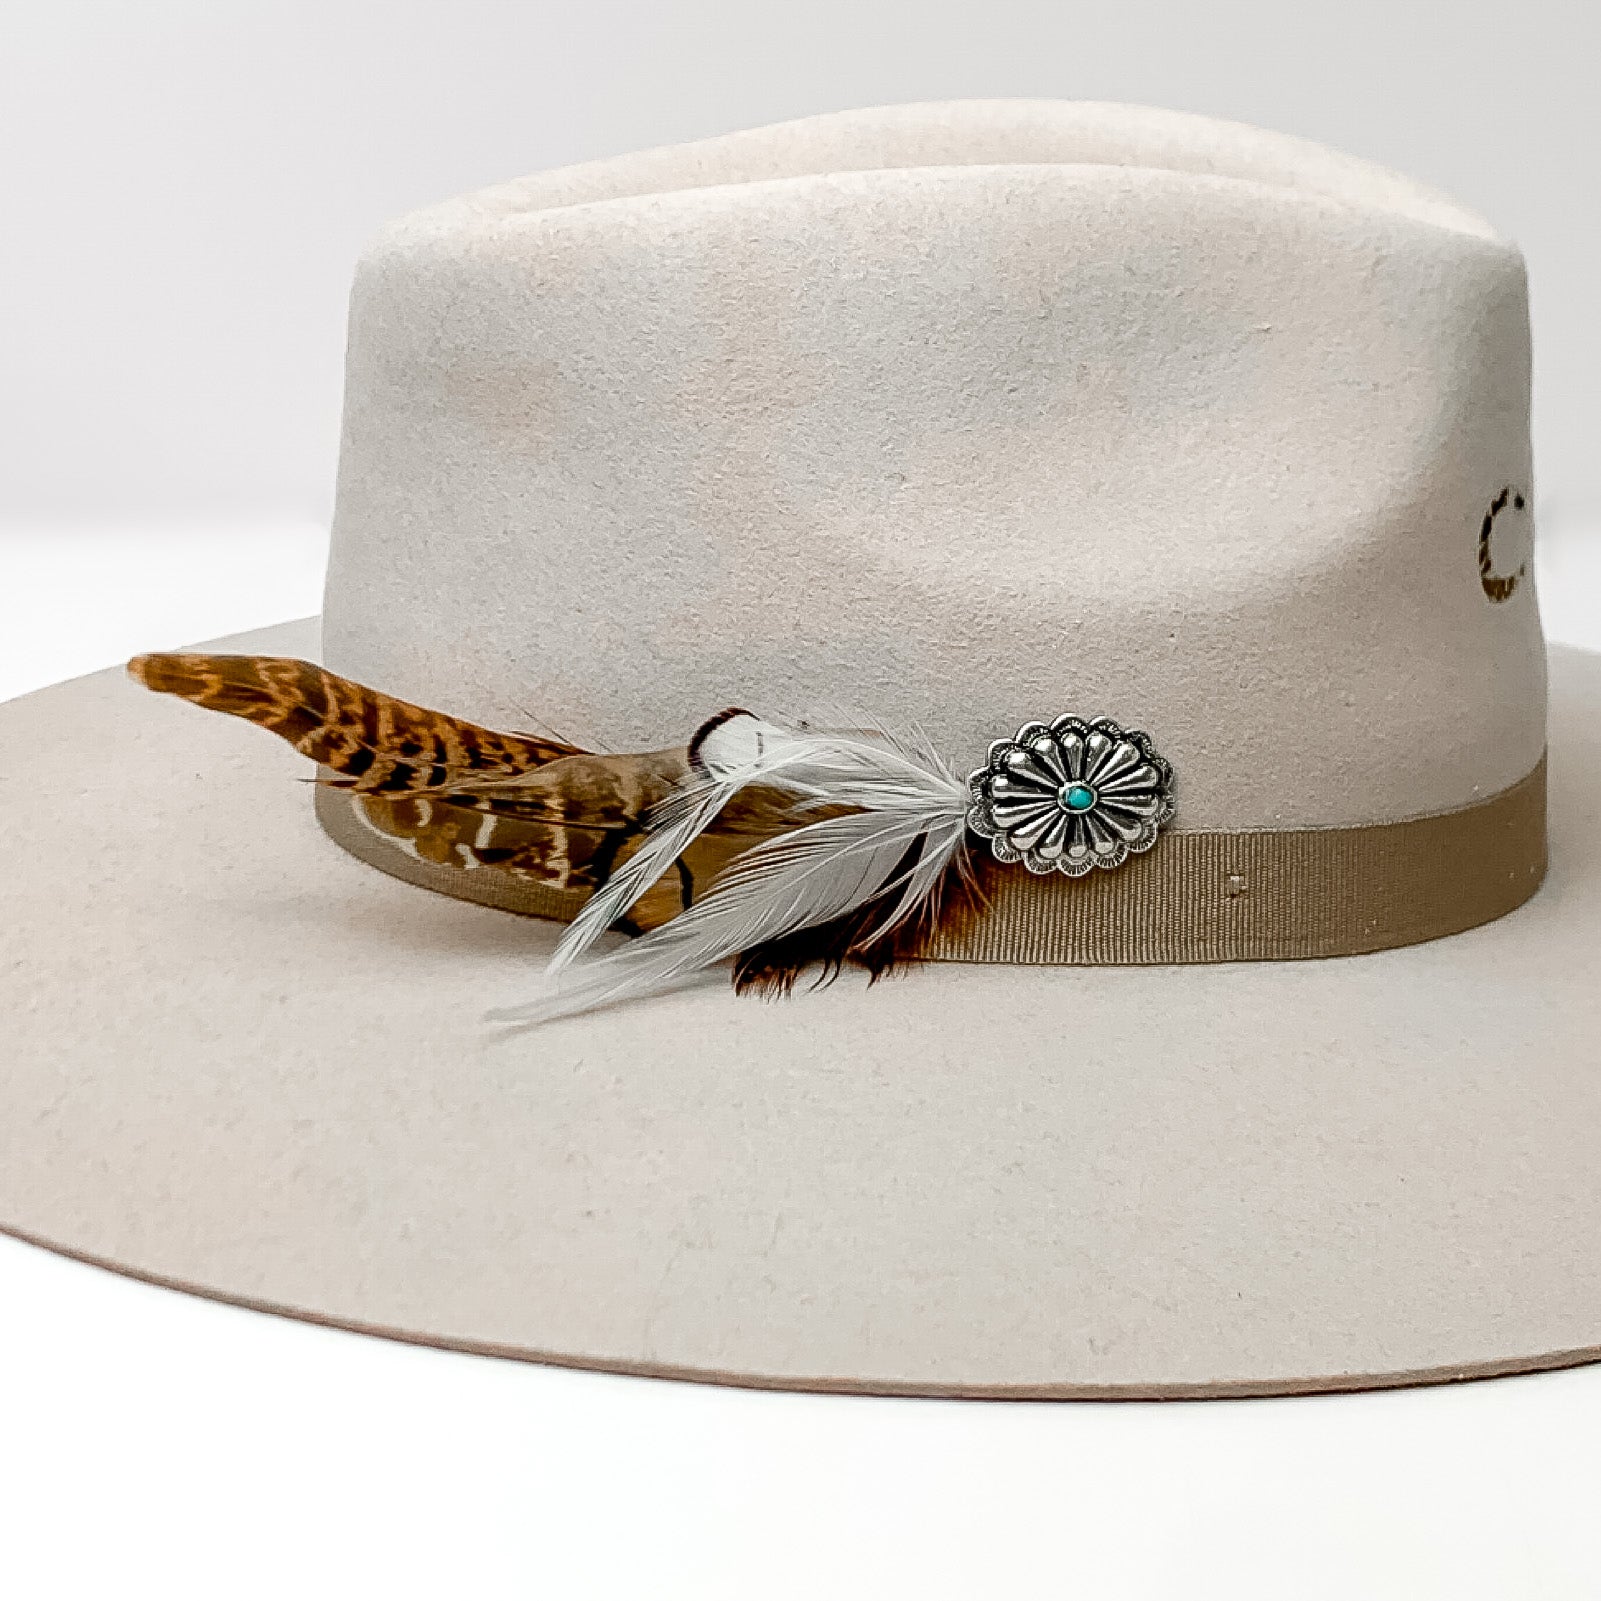 Oval Concho With Mixed Brown and White Feathers Hat Pin With Turquoise Stone. Pictured on a white background with the pin on the side of a light grey/ brown hat.